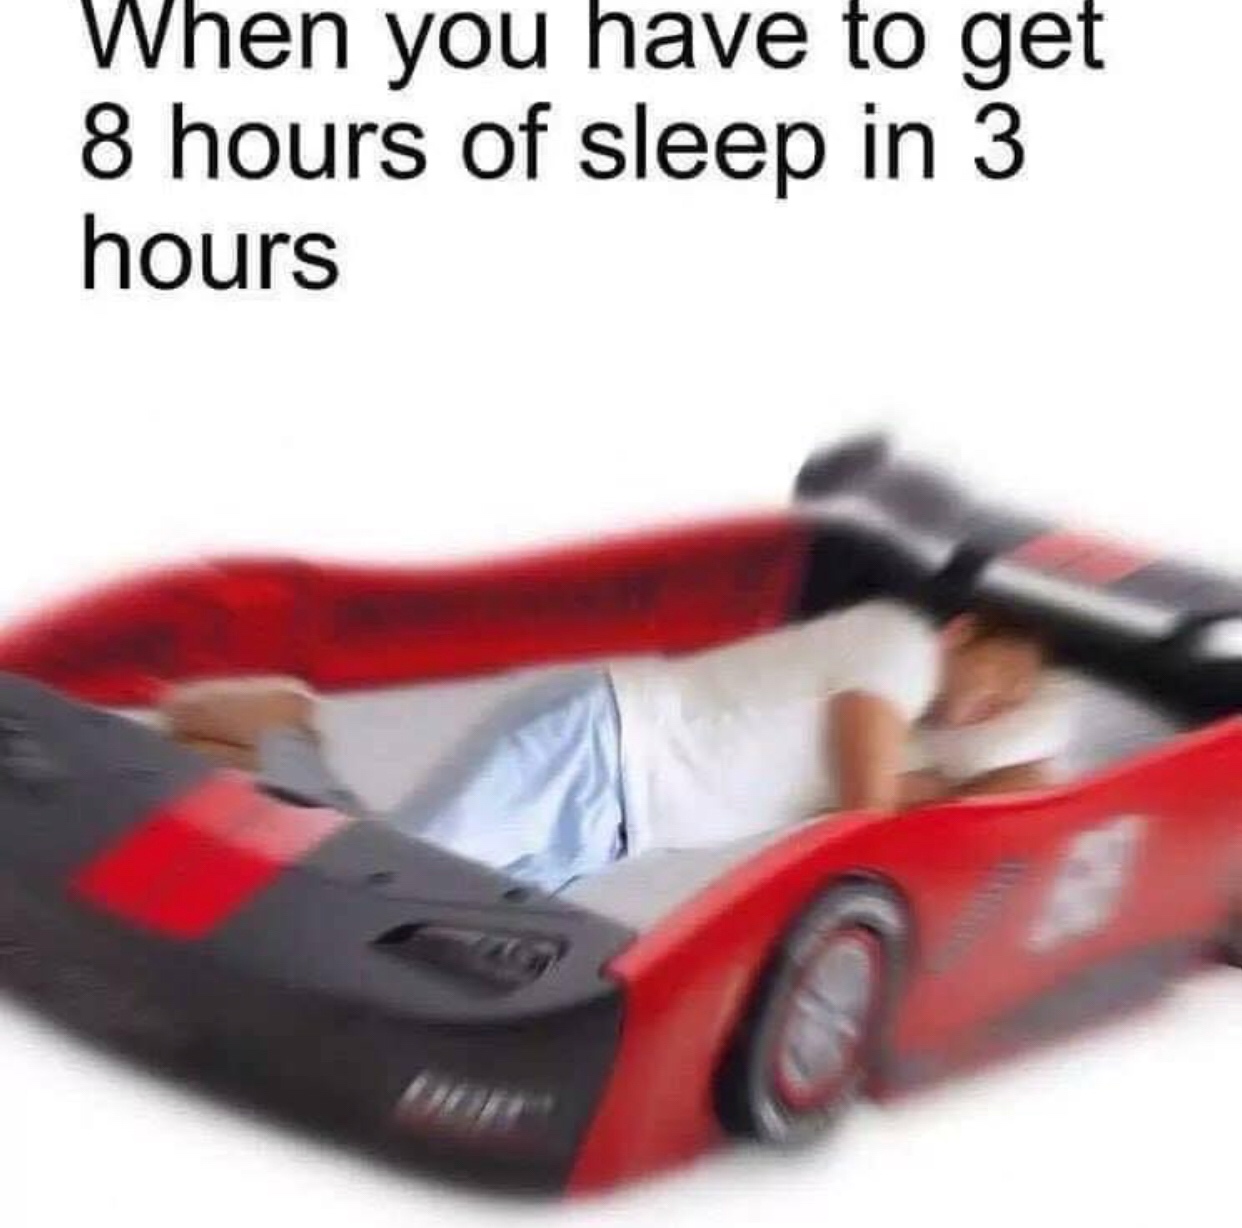 you need 8 hours of sleep - When you have to get 8 hours of sleep in 3 hours